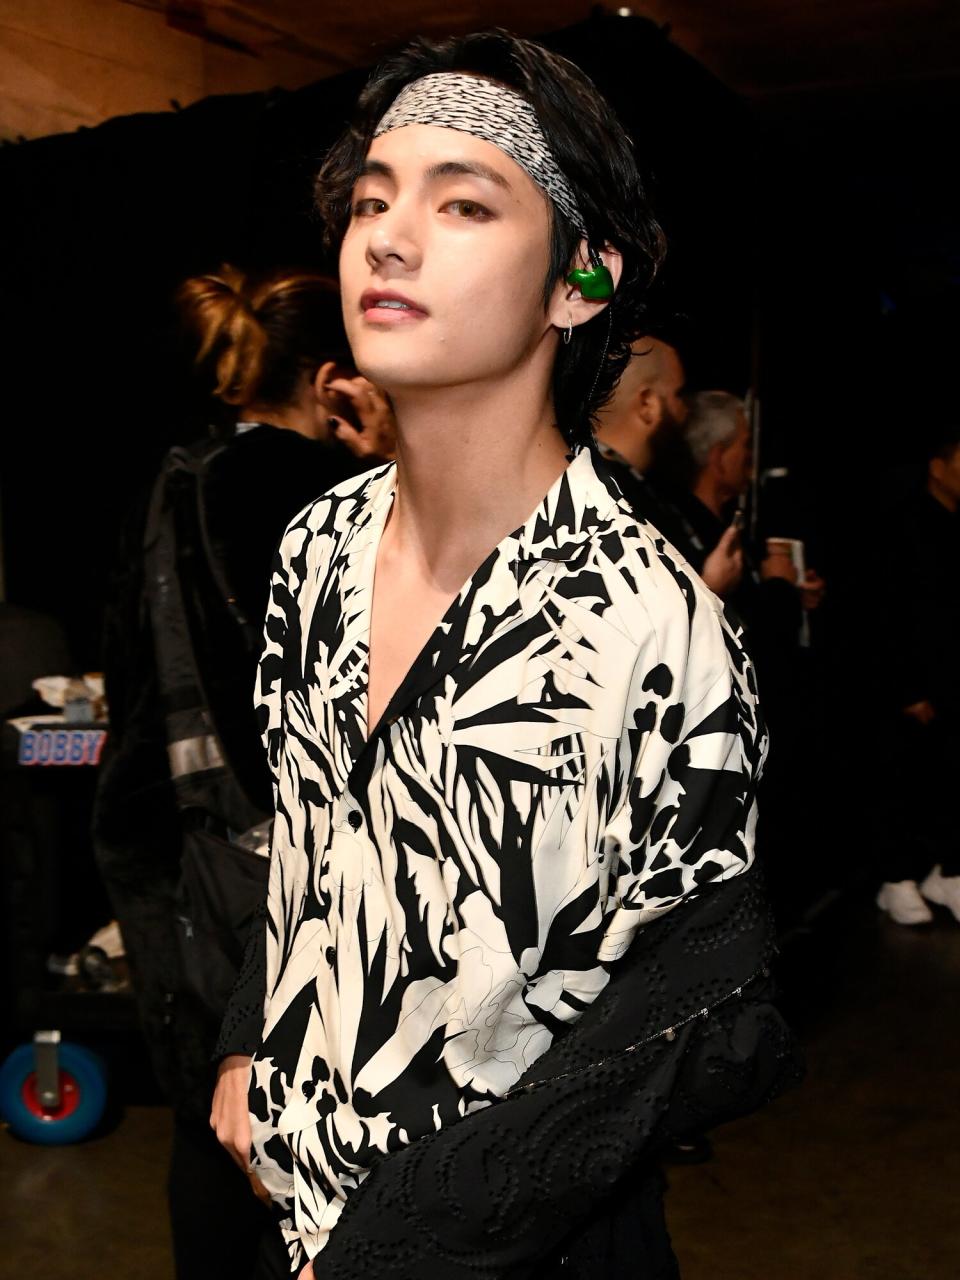 V of BTS attends the 62nd Annual GRAMMY Awards at STAPLES Center on January 26, 2020 in Los Angeles, California